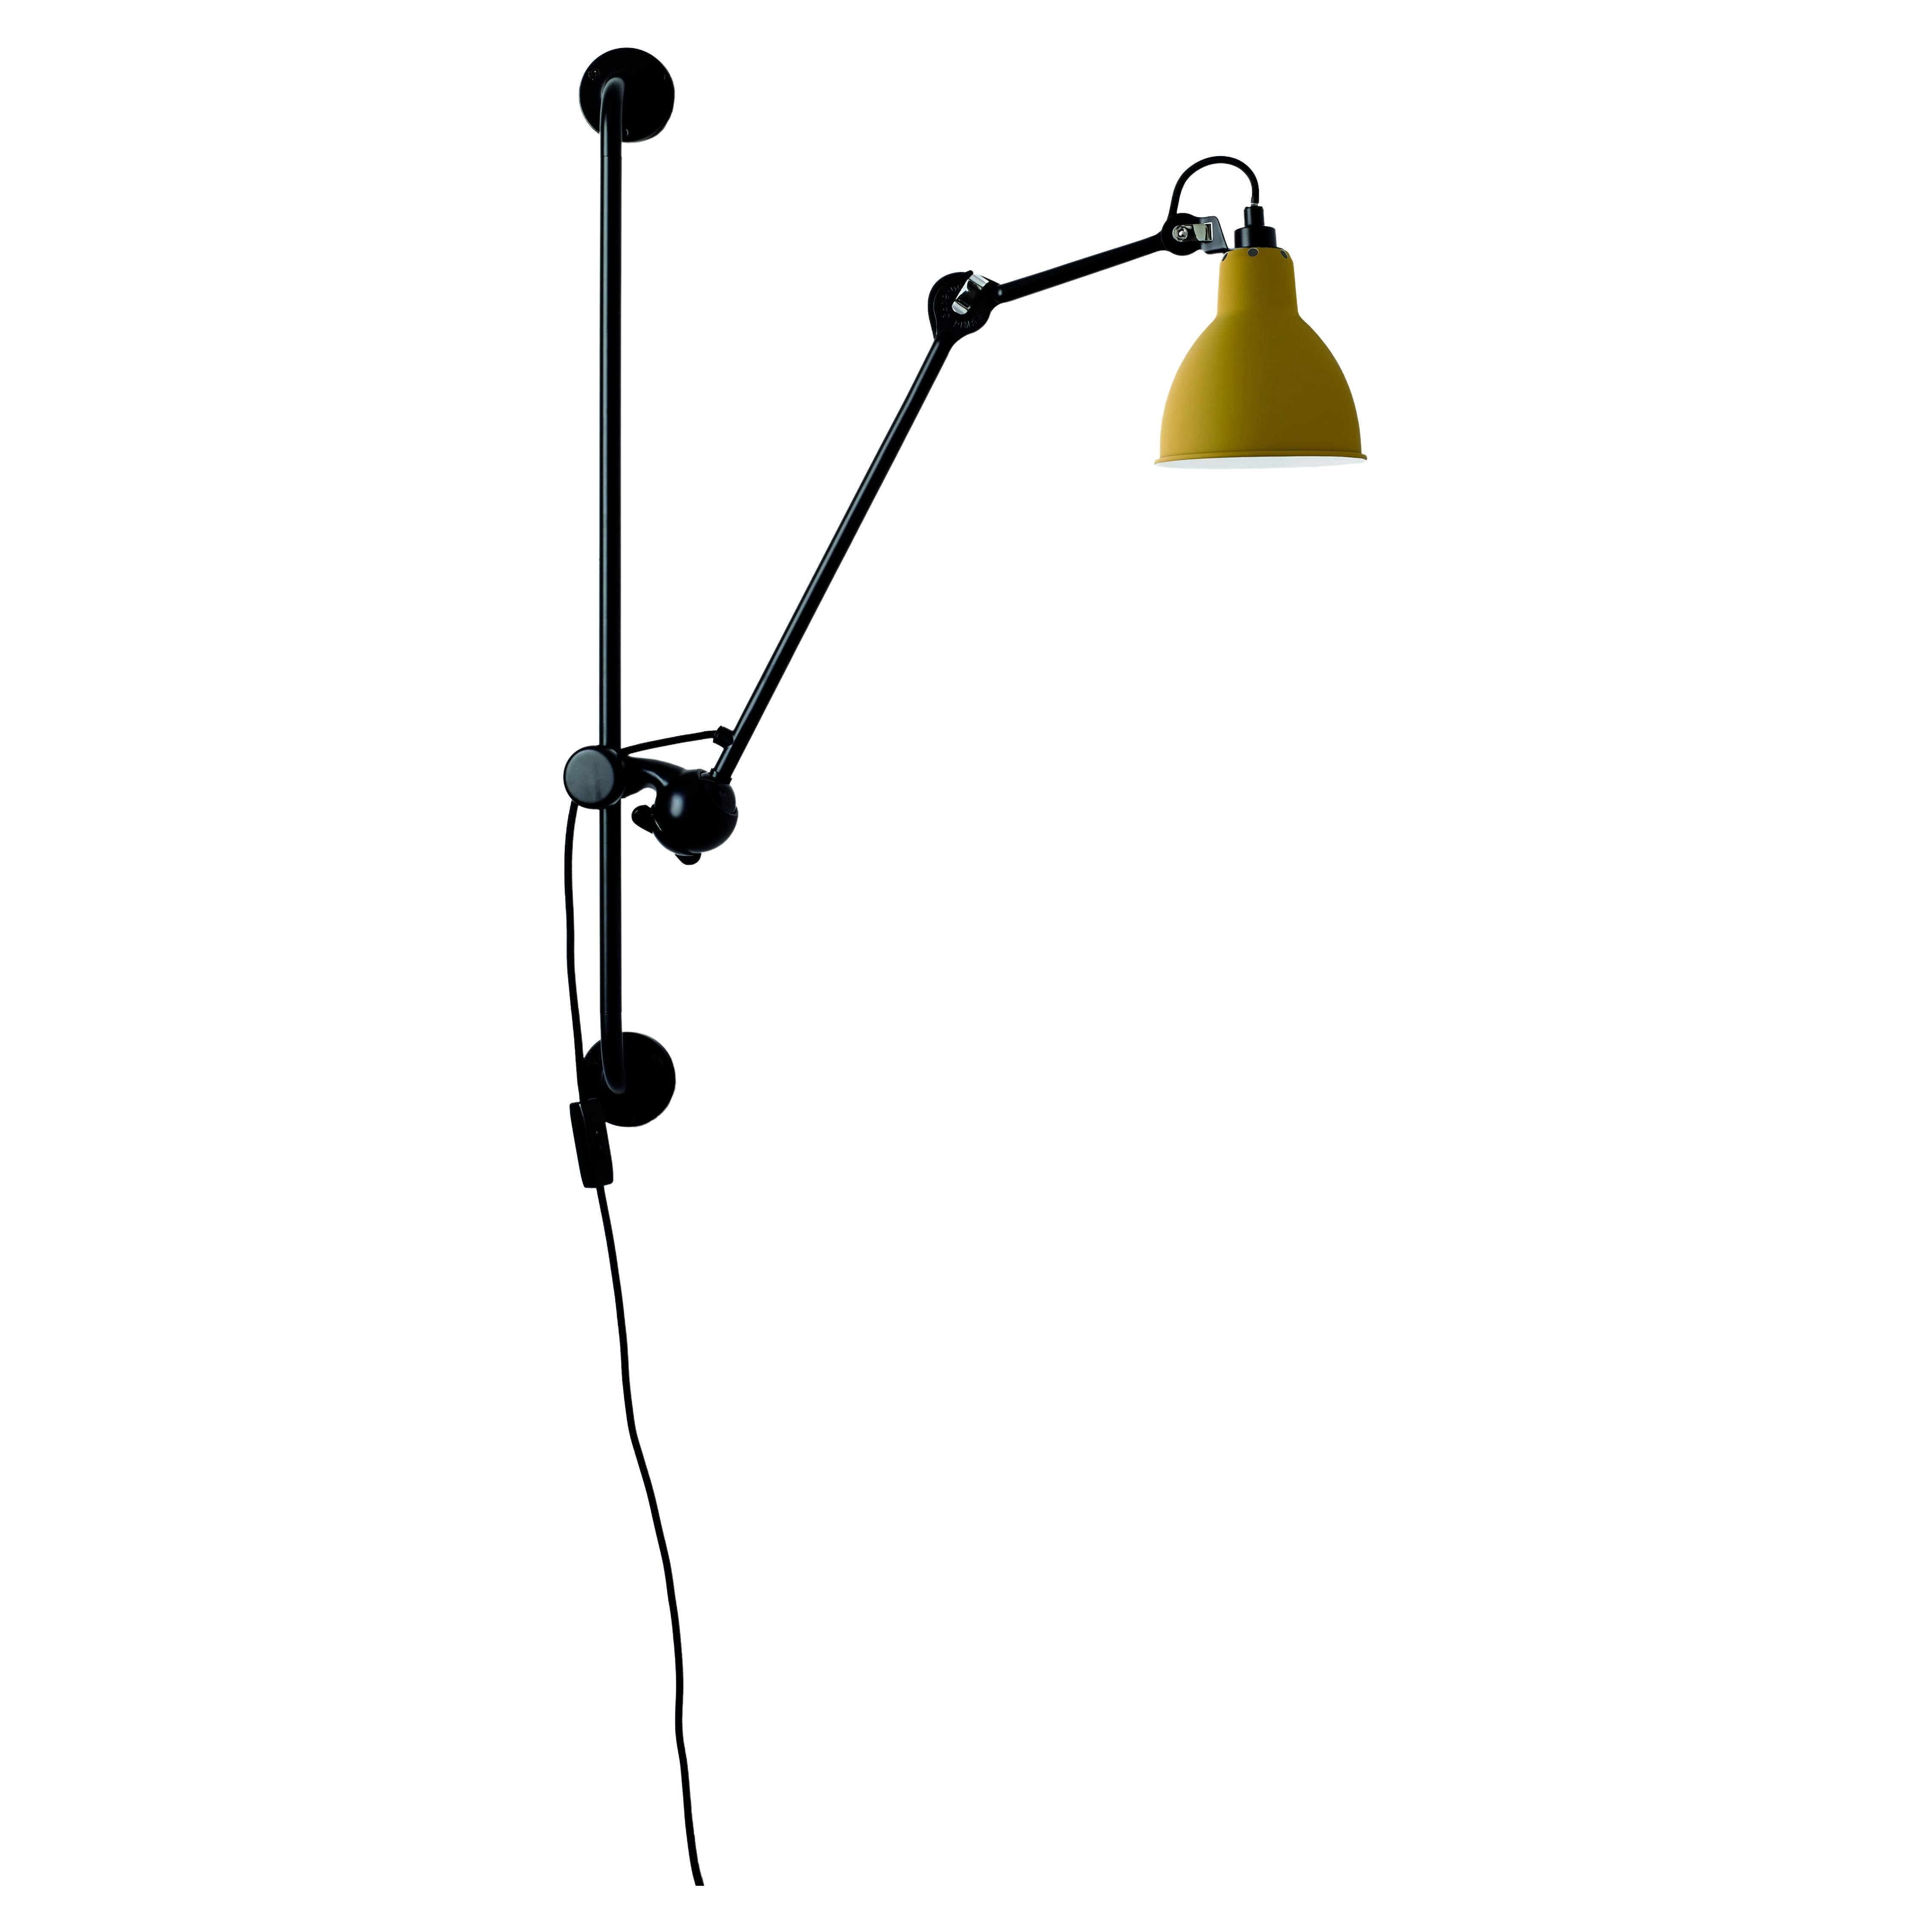 DCW Editions La Lampe Gras N°210 Wall Lamp in Black Arm and Yellow Shade For Sale